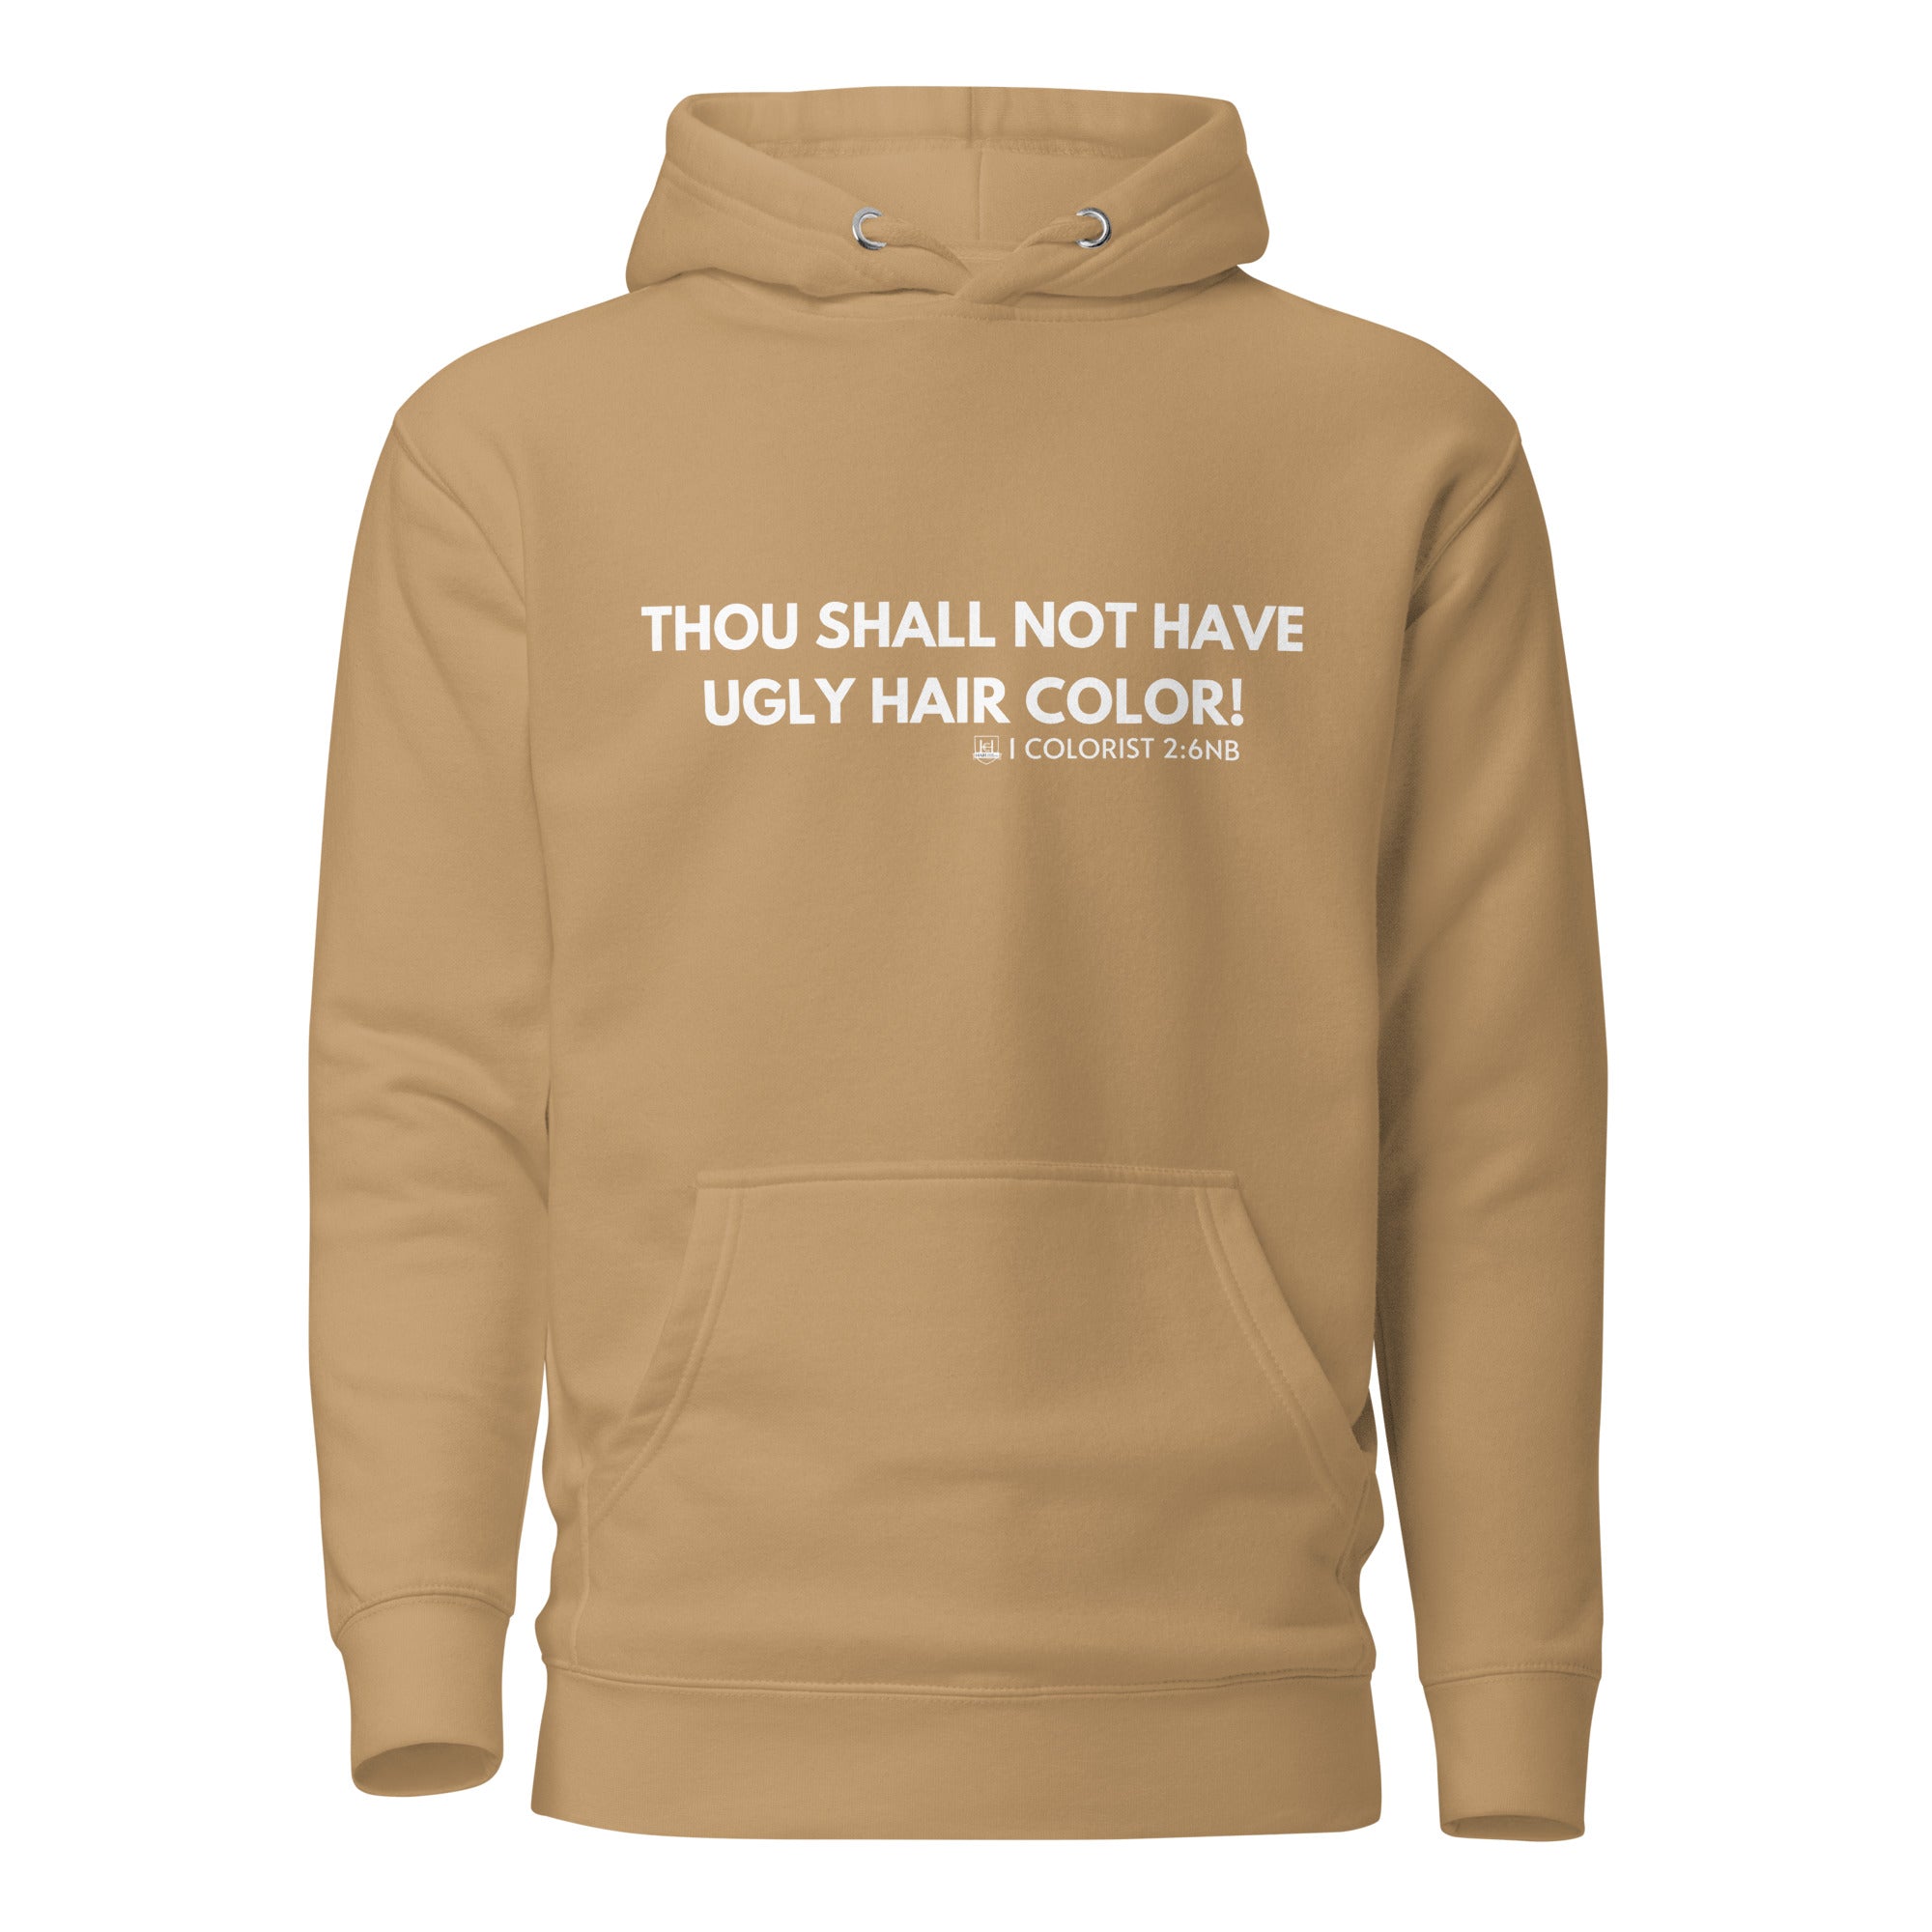 "Thou Shall Not" Unisex Hoodie